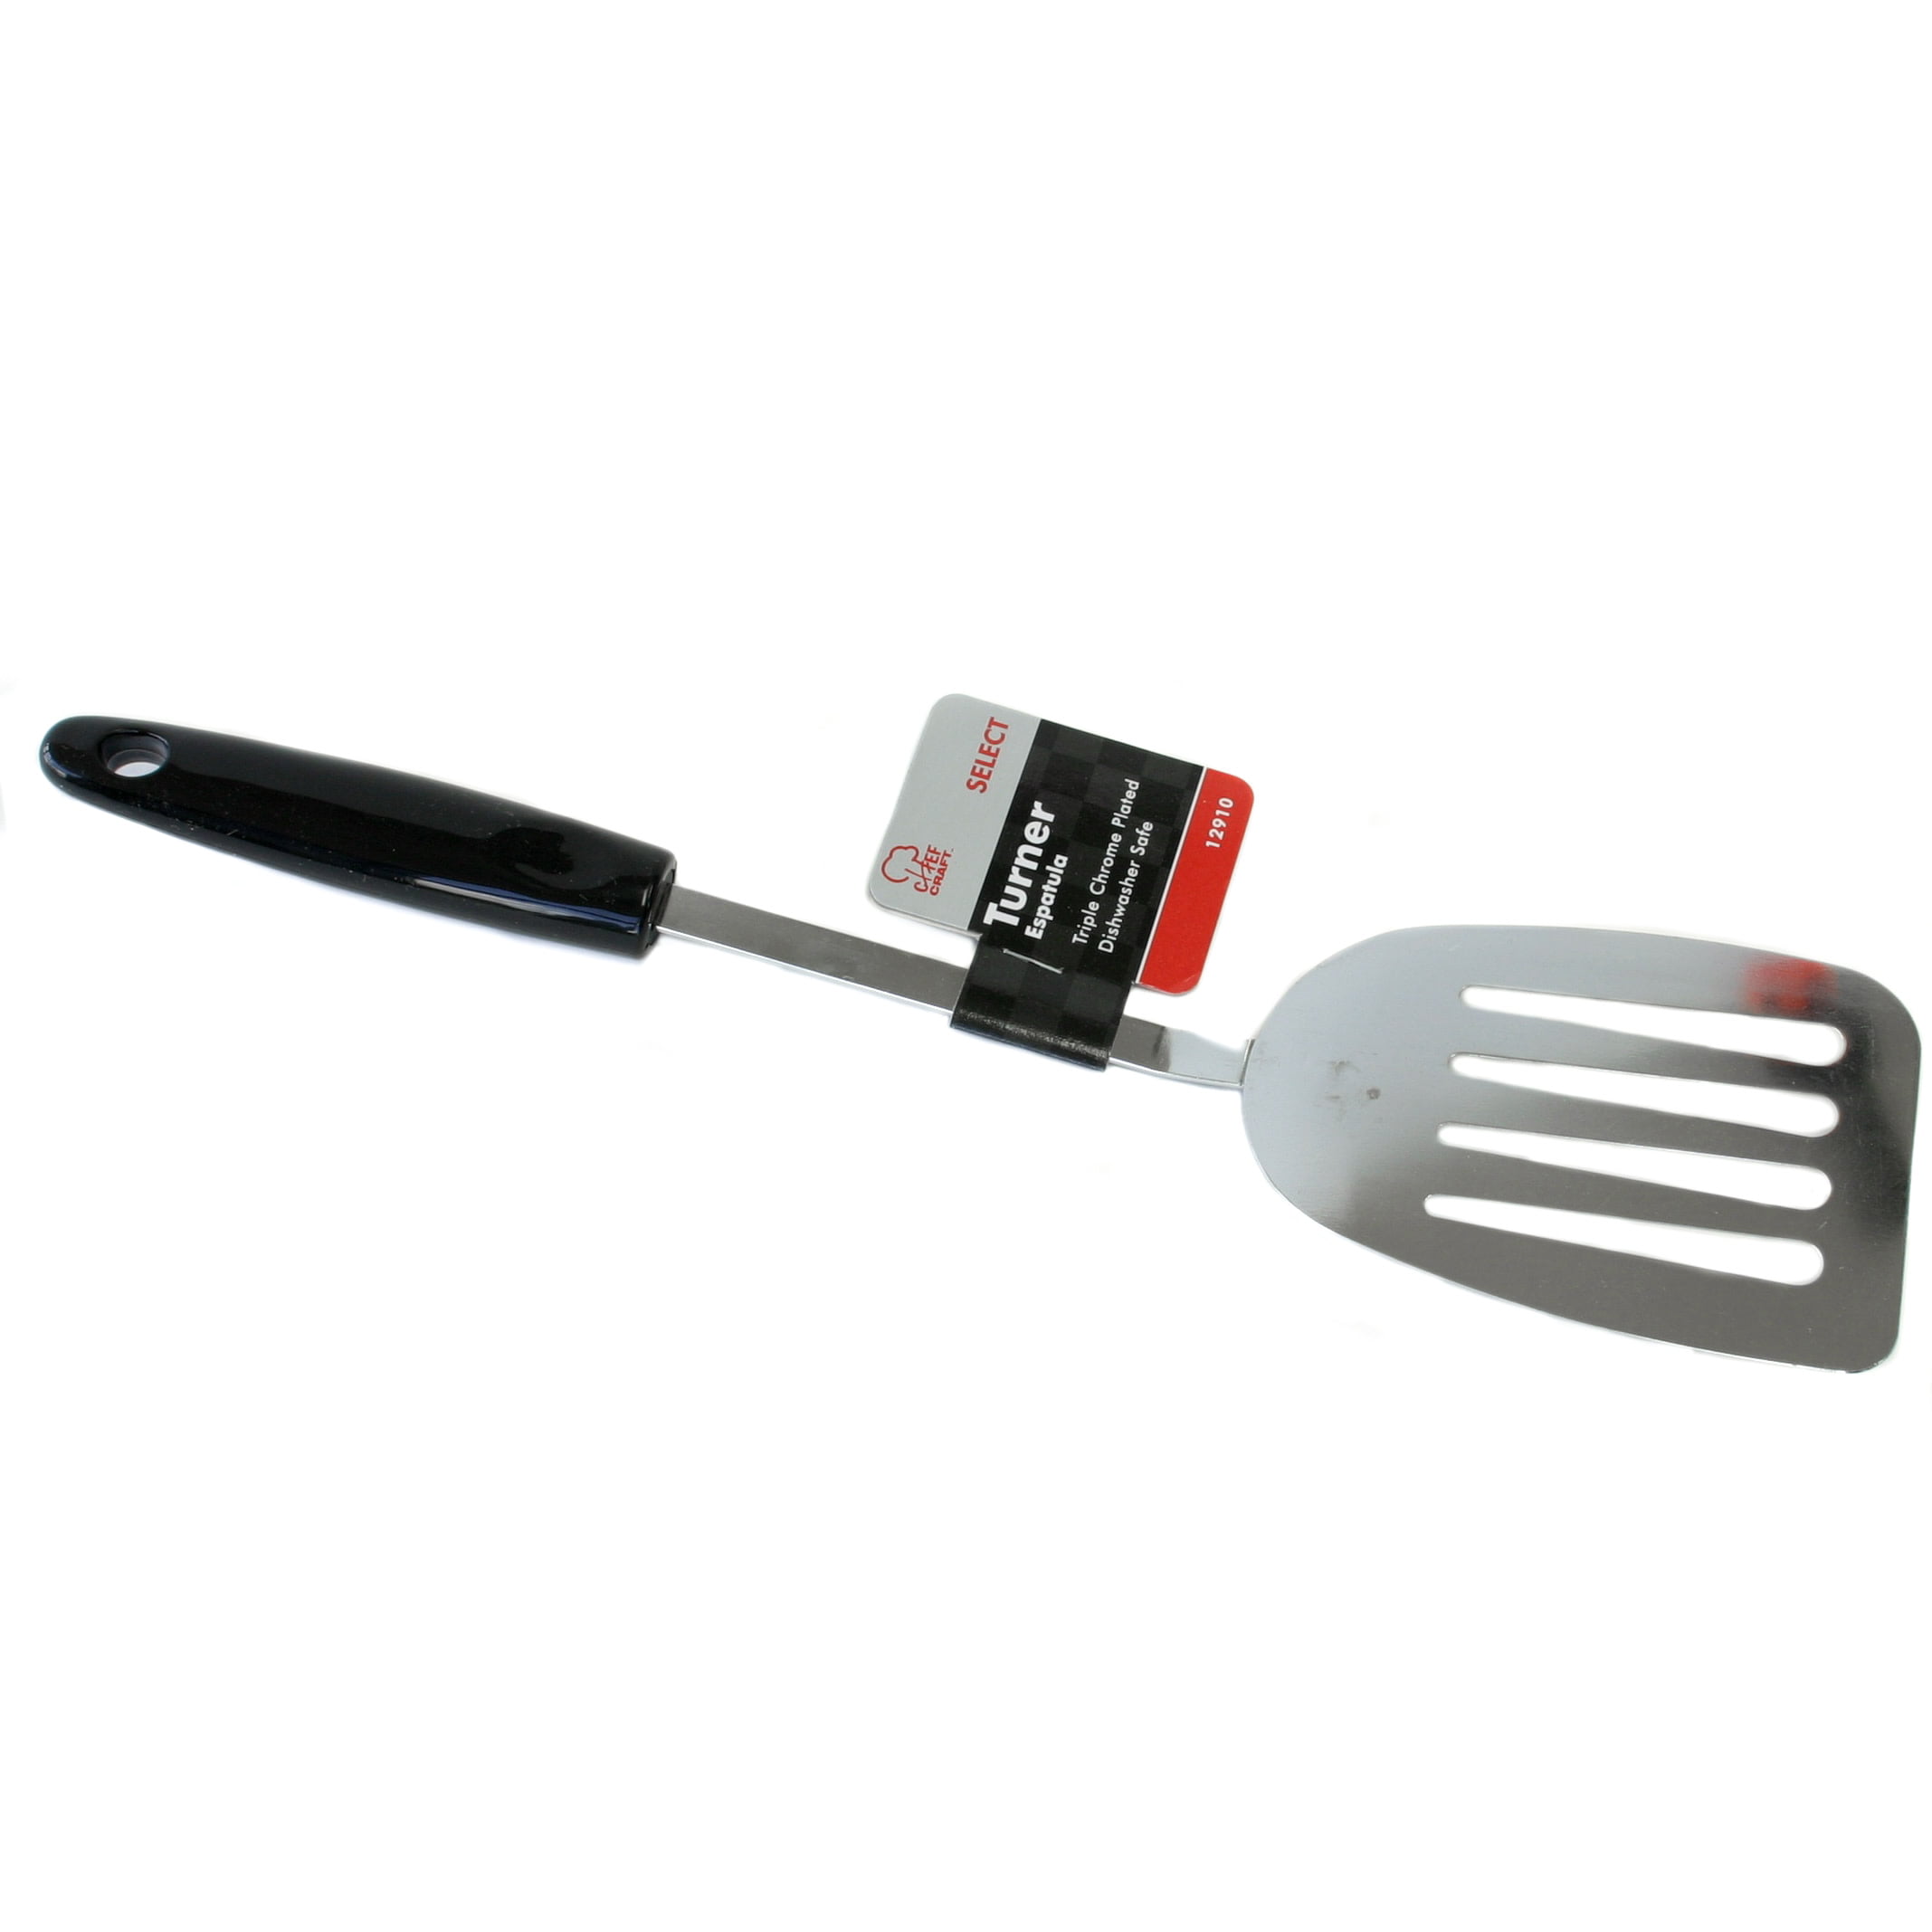  Chef Craft Select Kitchen Tool and Utensil Set, 8